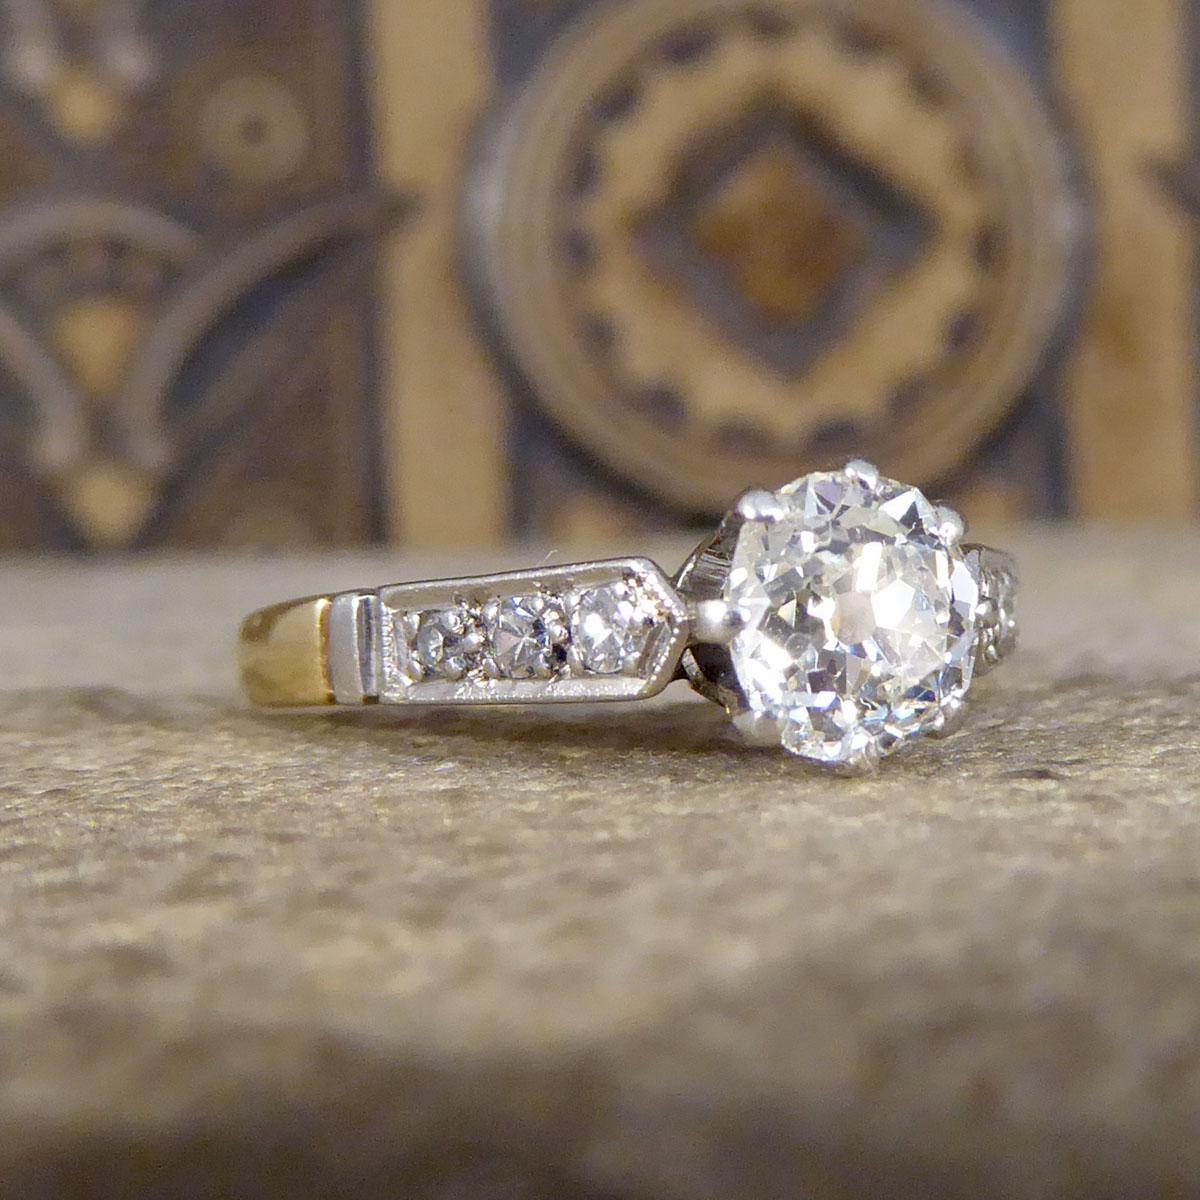 A pretty 18ct Yellow Gold and Platinum ring that was made in the 1920's. This ring features an Old Cushion Cut Diamond in the centre weighing approximately 0.65ct. The centre Diamond has Clarity grading of I with one black inclusion in the stone and